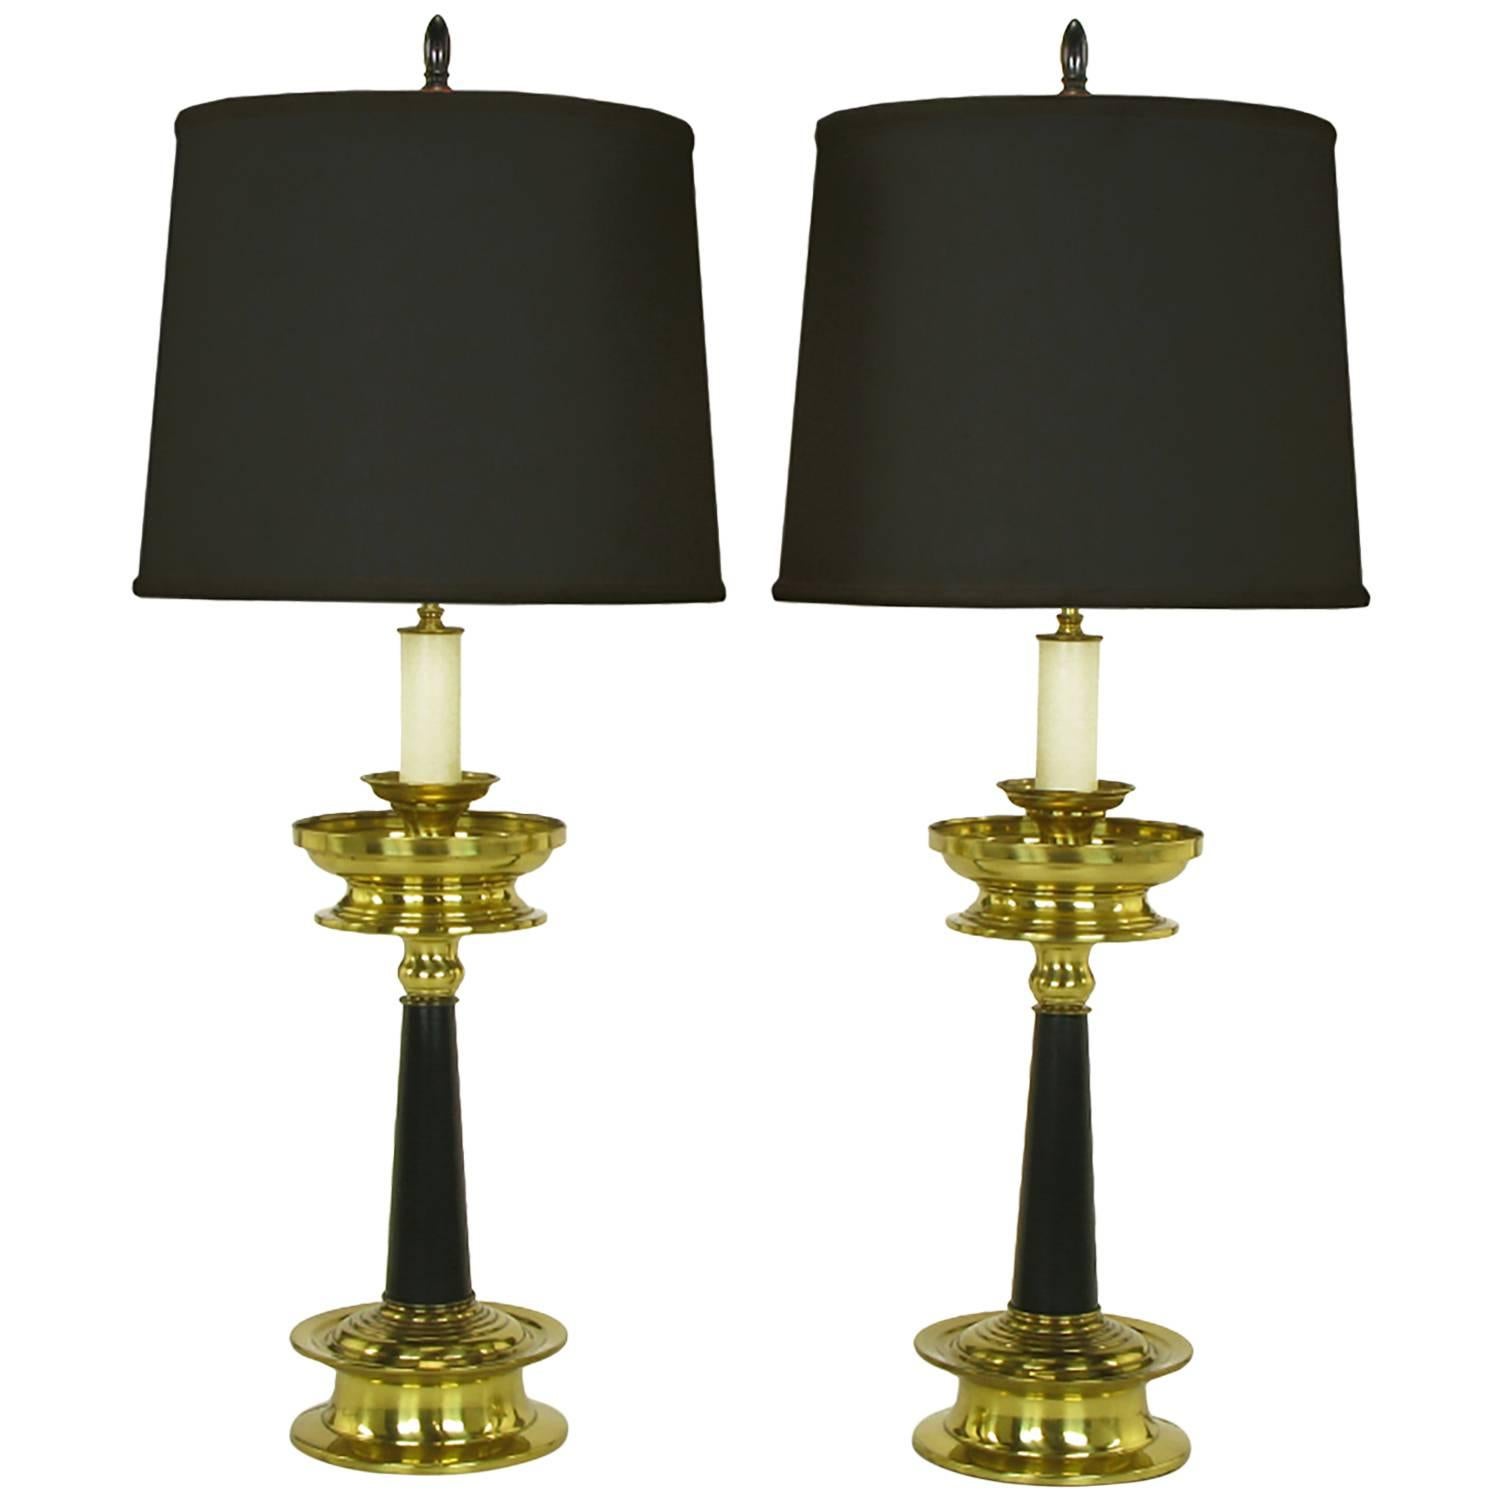 Pair of Substantial Brass and Black Lacquer Table Lamps